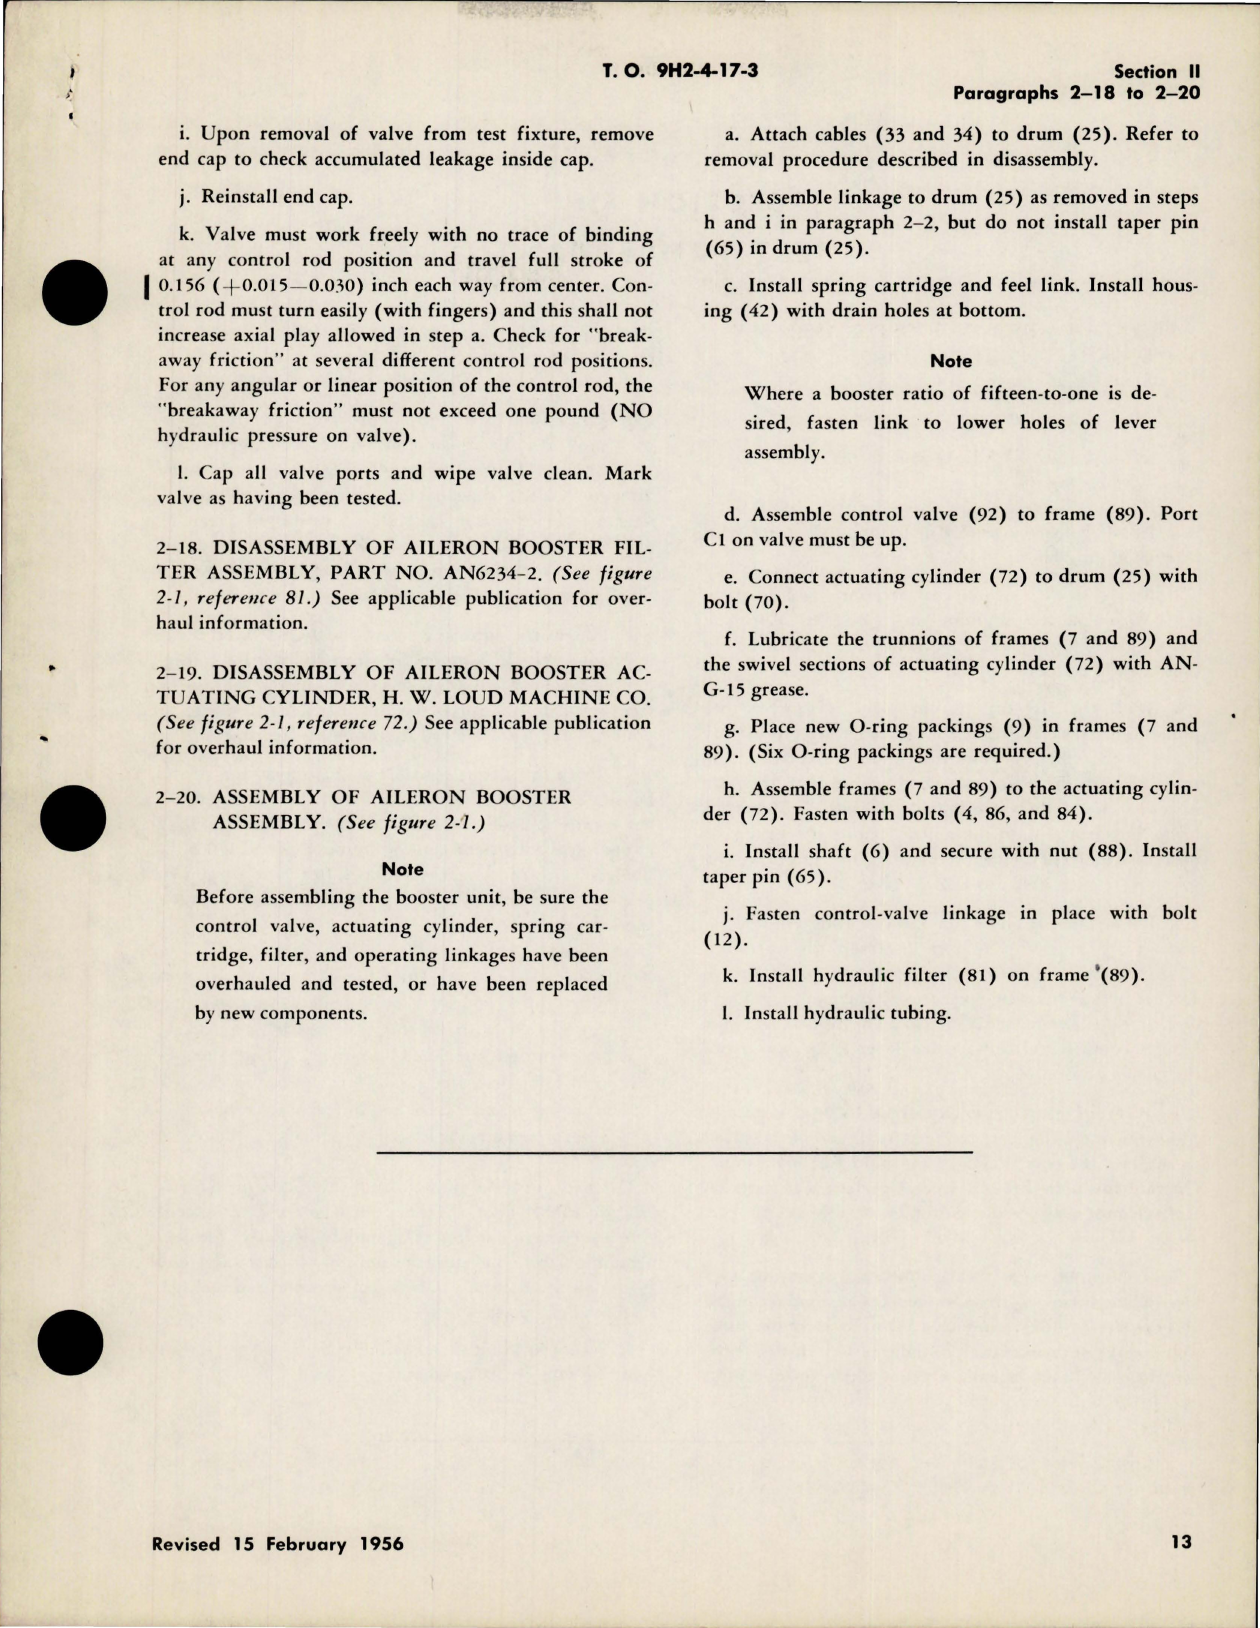 Sample page 5 from AirCorps Library document: Overhaul Instructions for Aileron Control Booster Assembly - Part 176455-2 